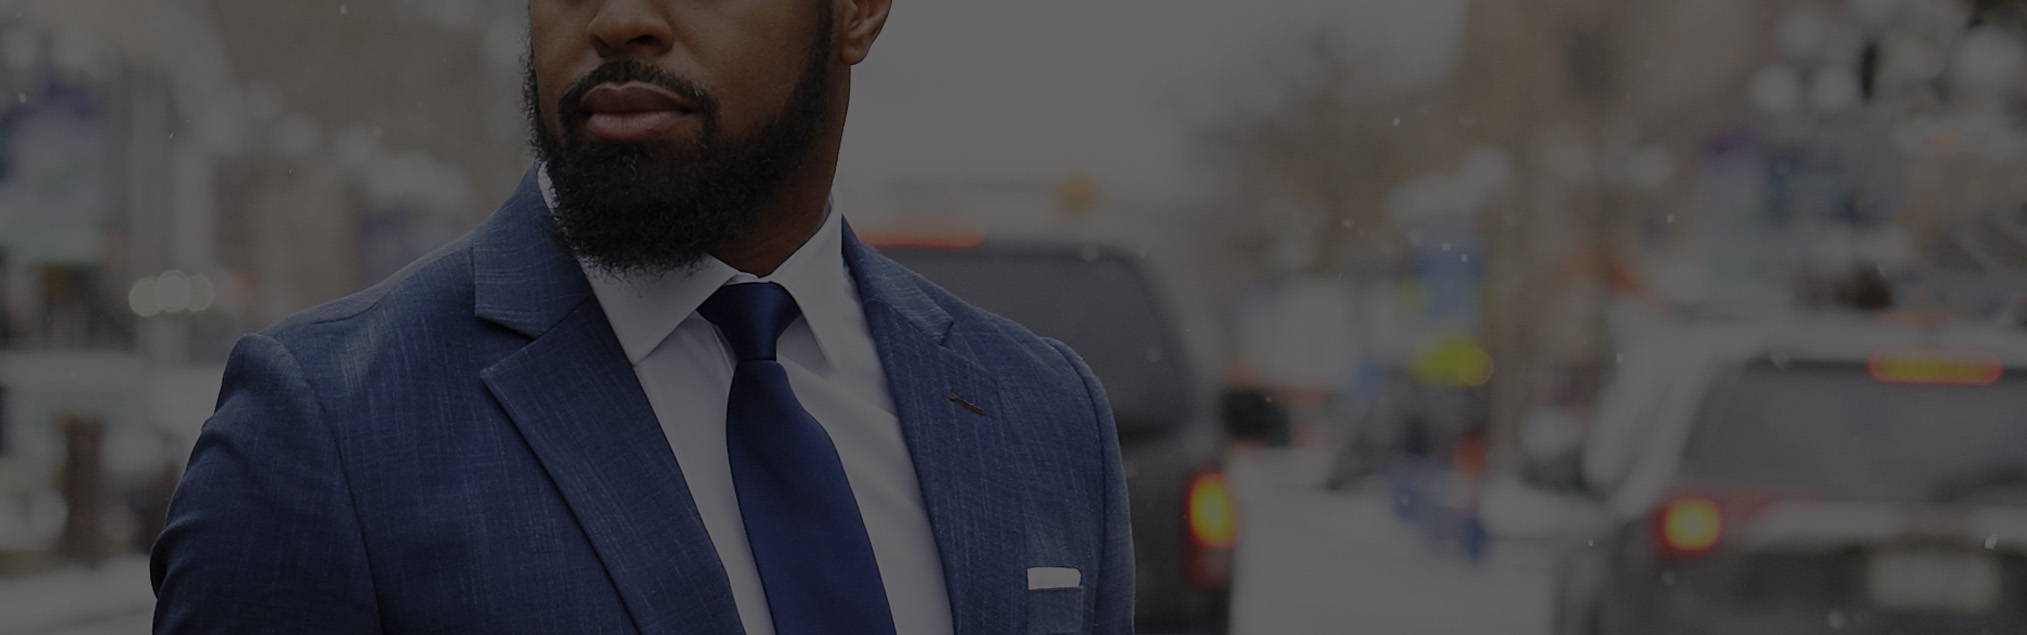 Custom Suits in Philadelphia - State & Liberty Suits